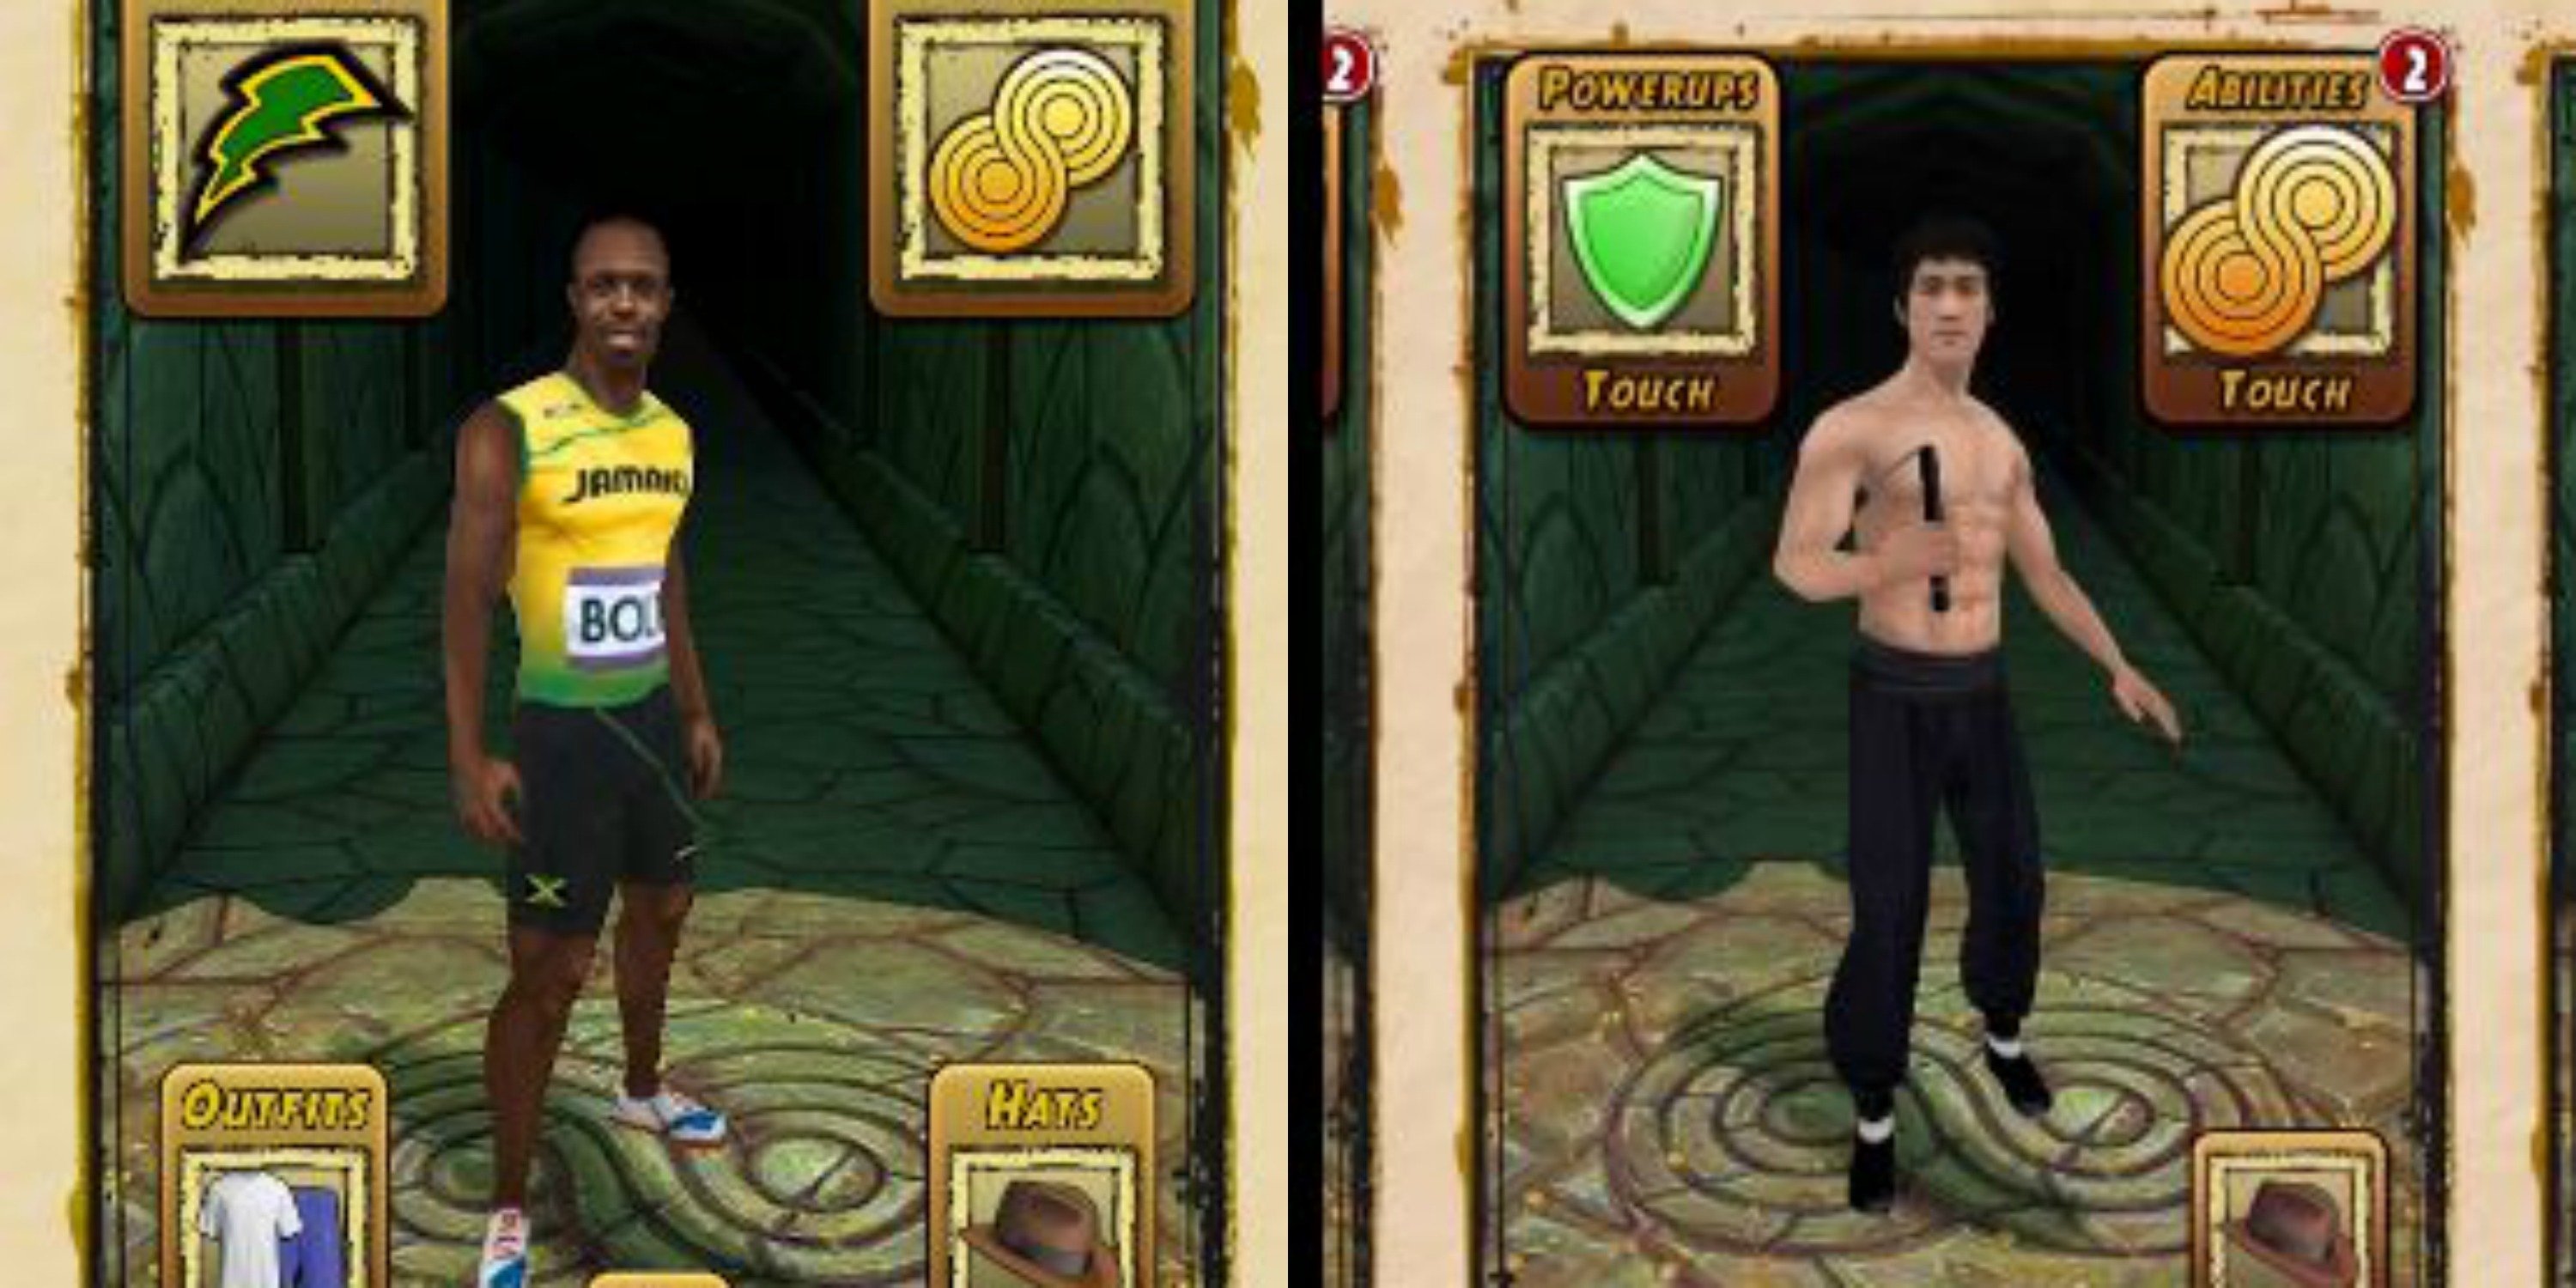 Has Fawad Khan inspired the new Temple Run 2 Lost Jungle character